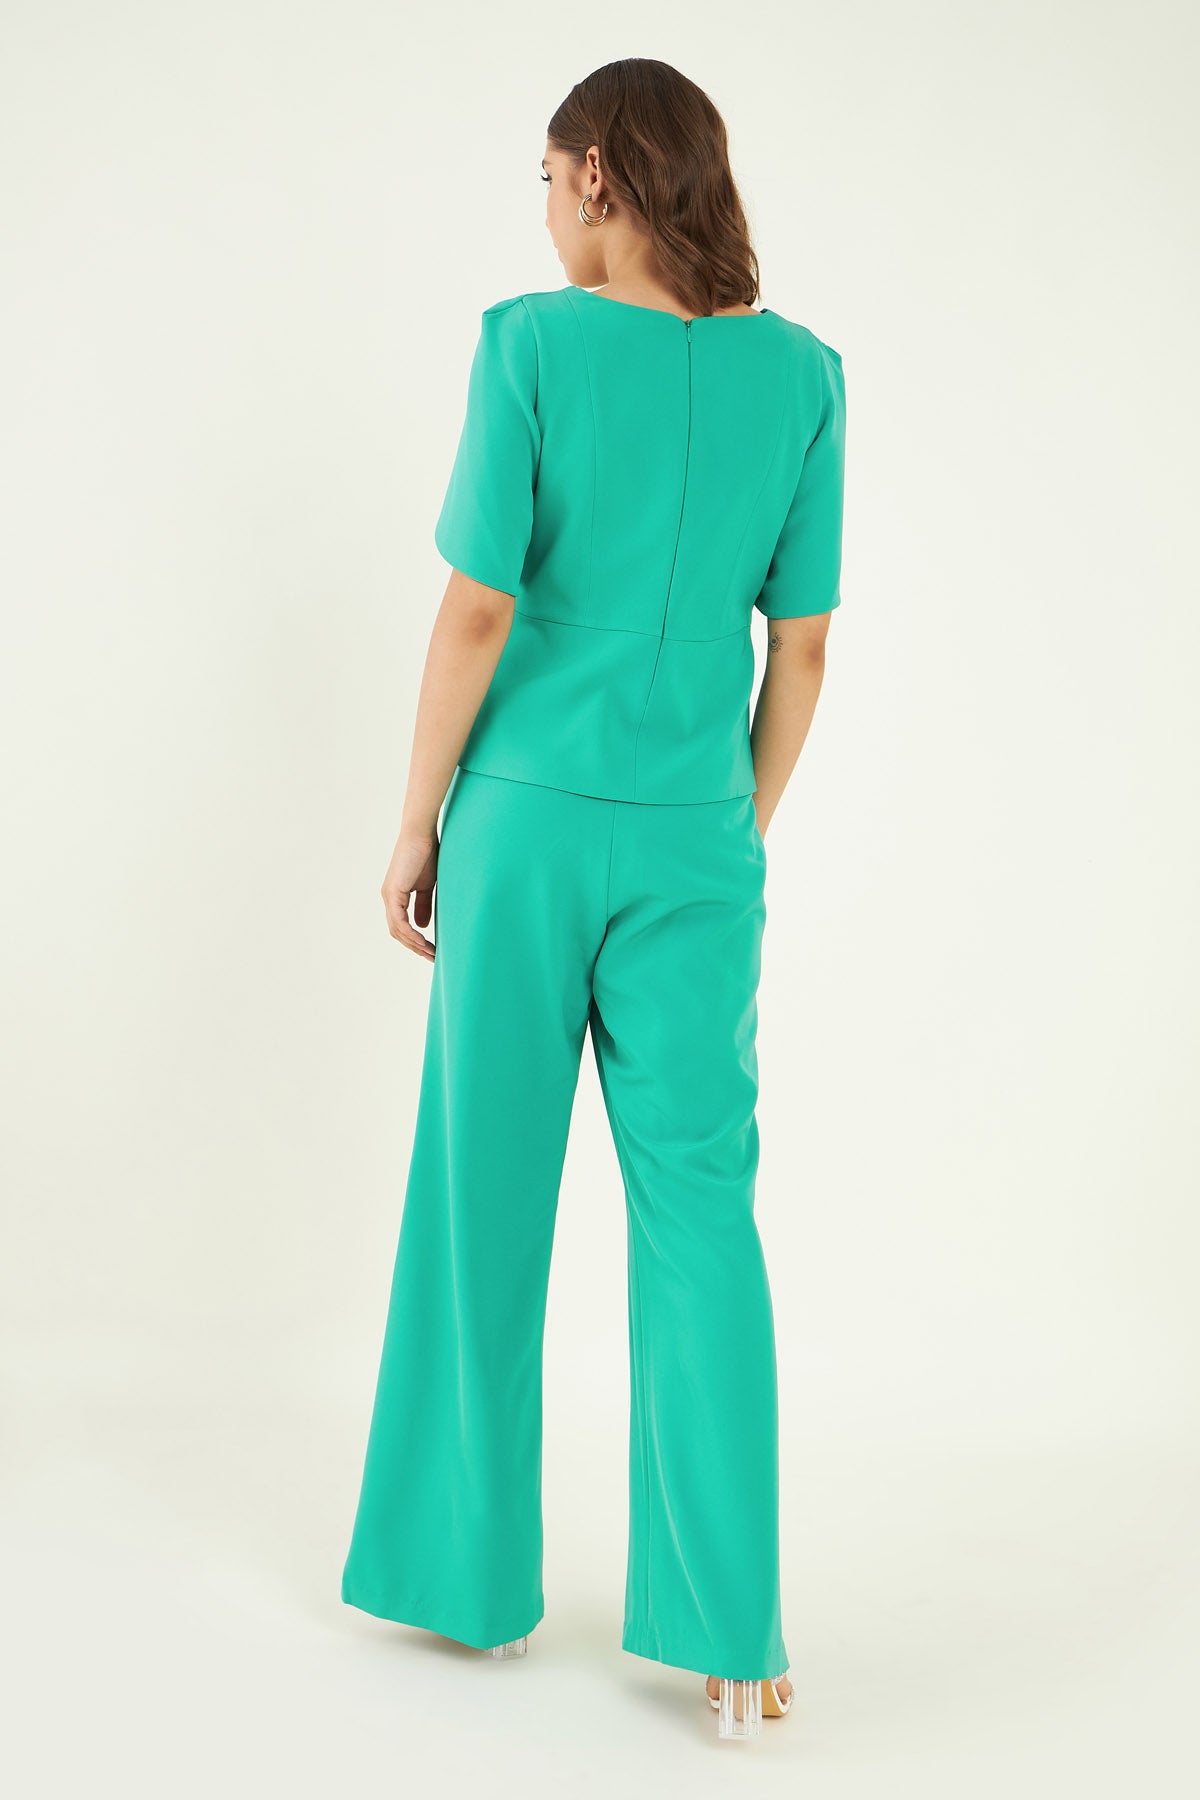 Turquoise Belted Co-ord Set